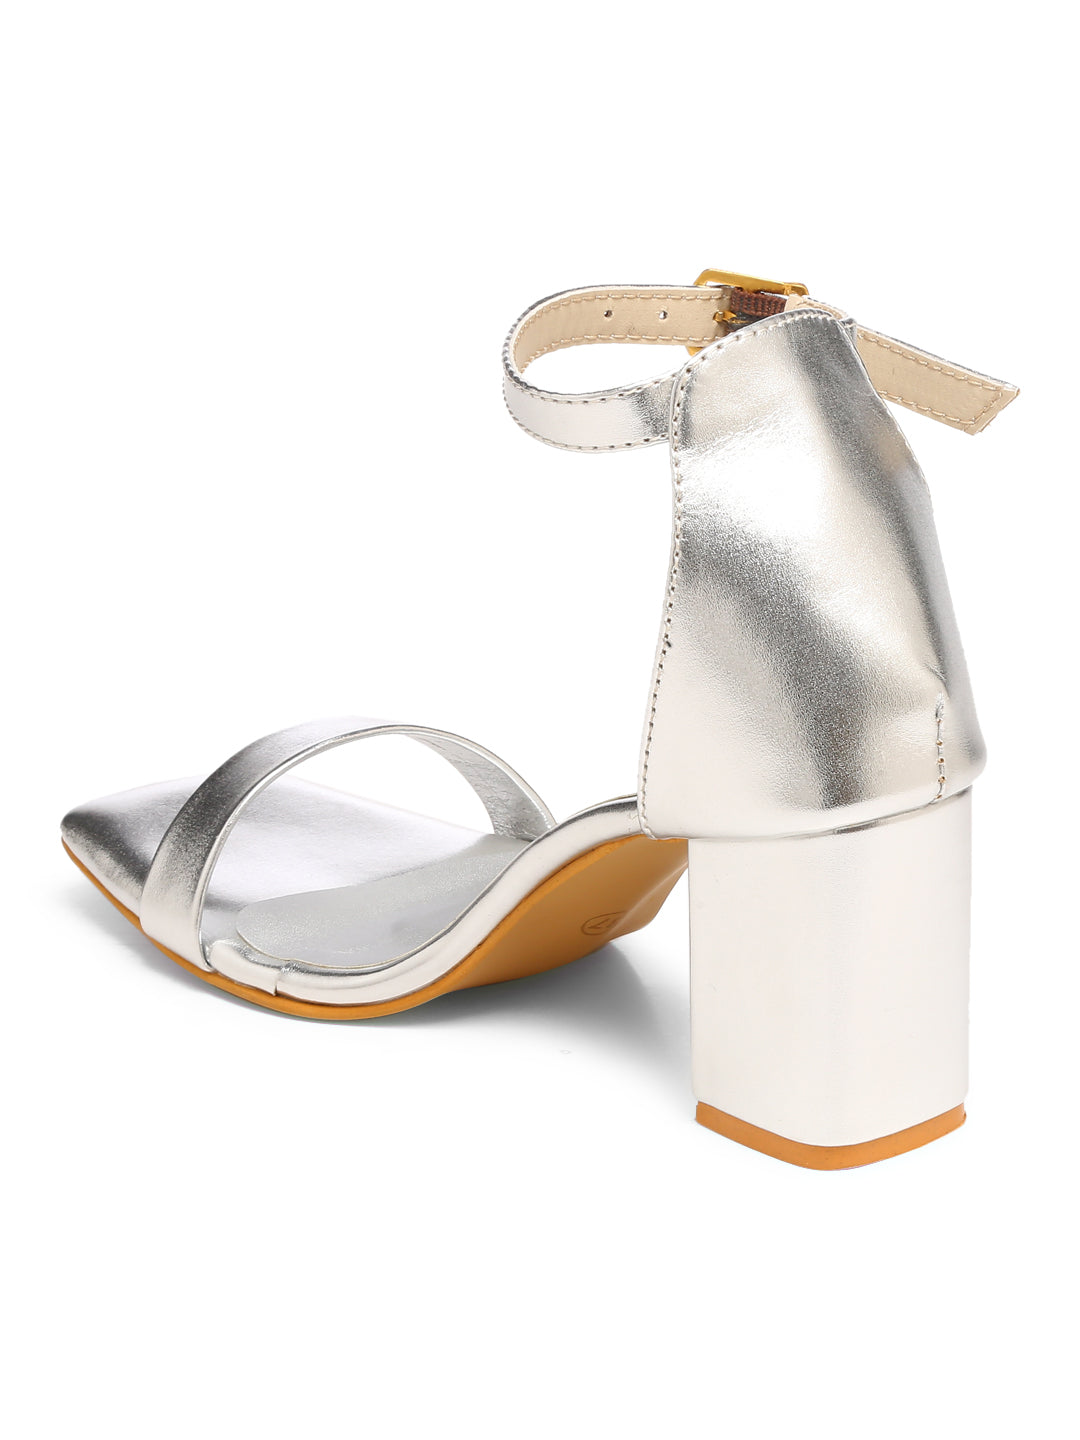 GNIST Silver Classic Ankle Strap Block Heel